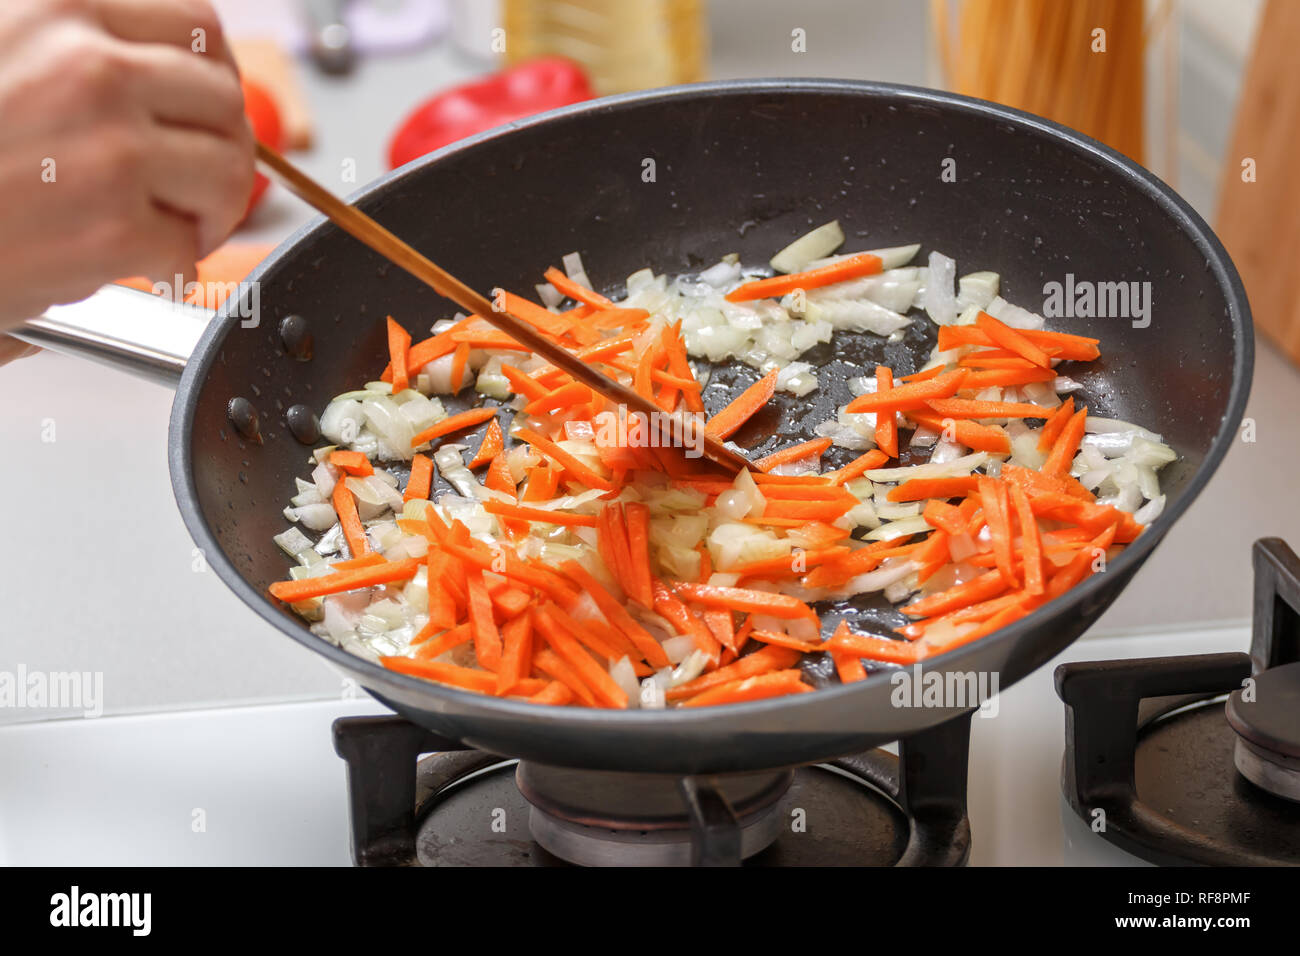 Homemade cooking. A woman fries onions and carrots in a hot frying pan with vegetable oil. Close-up. Stock Photo